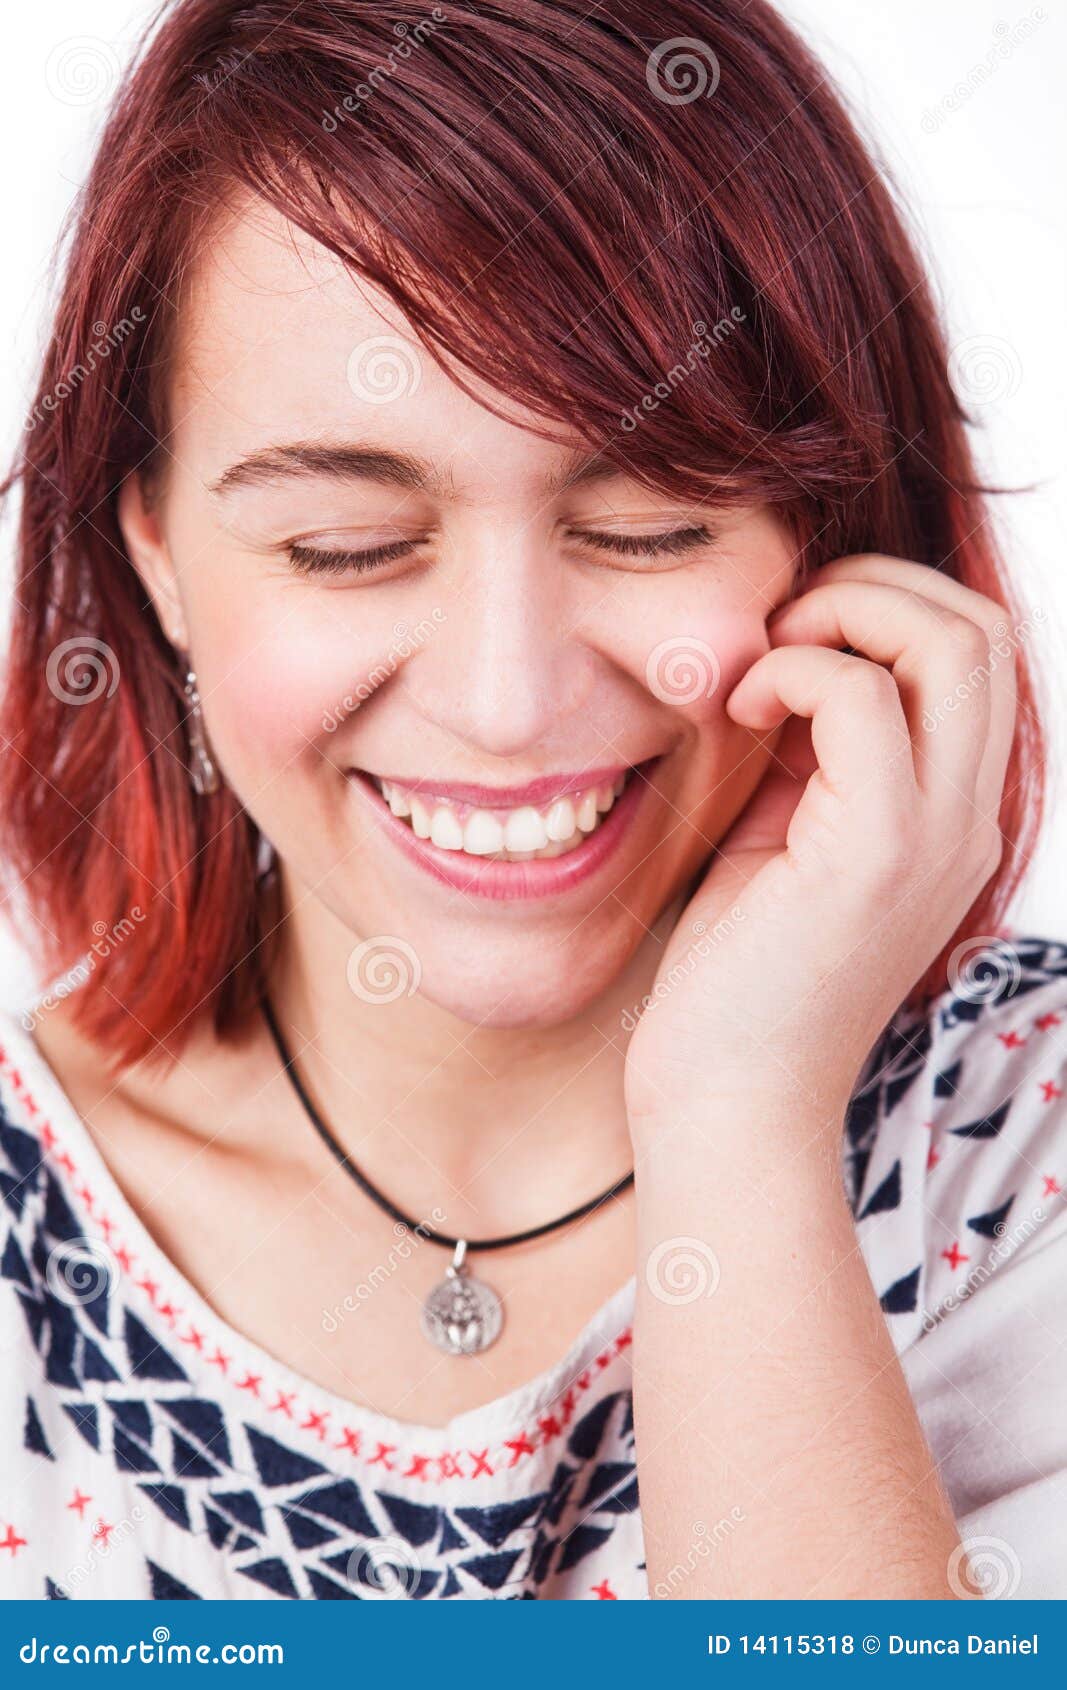 candid real laugh of natural happy woman